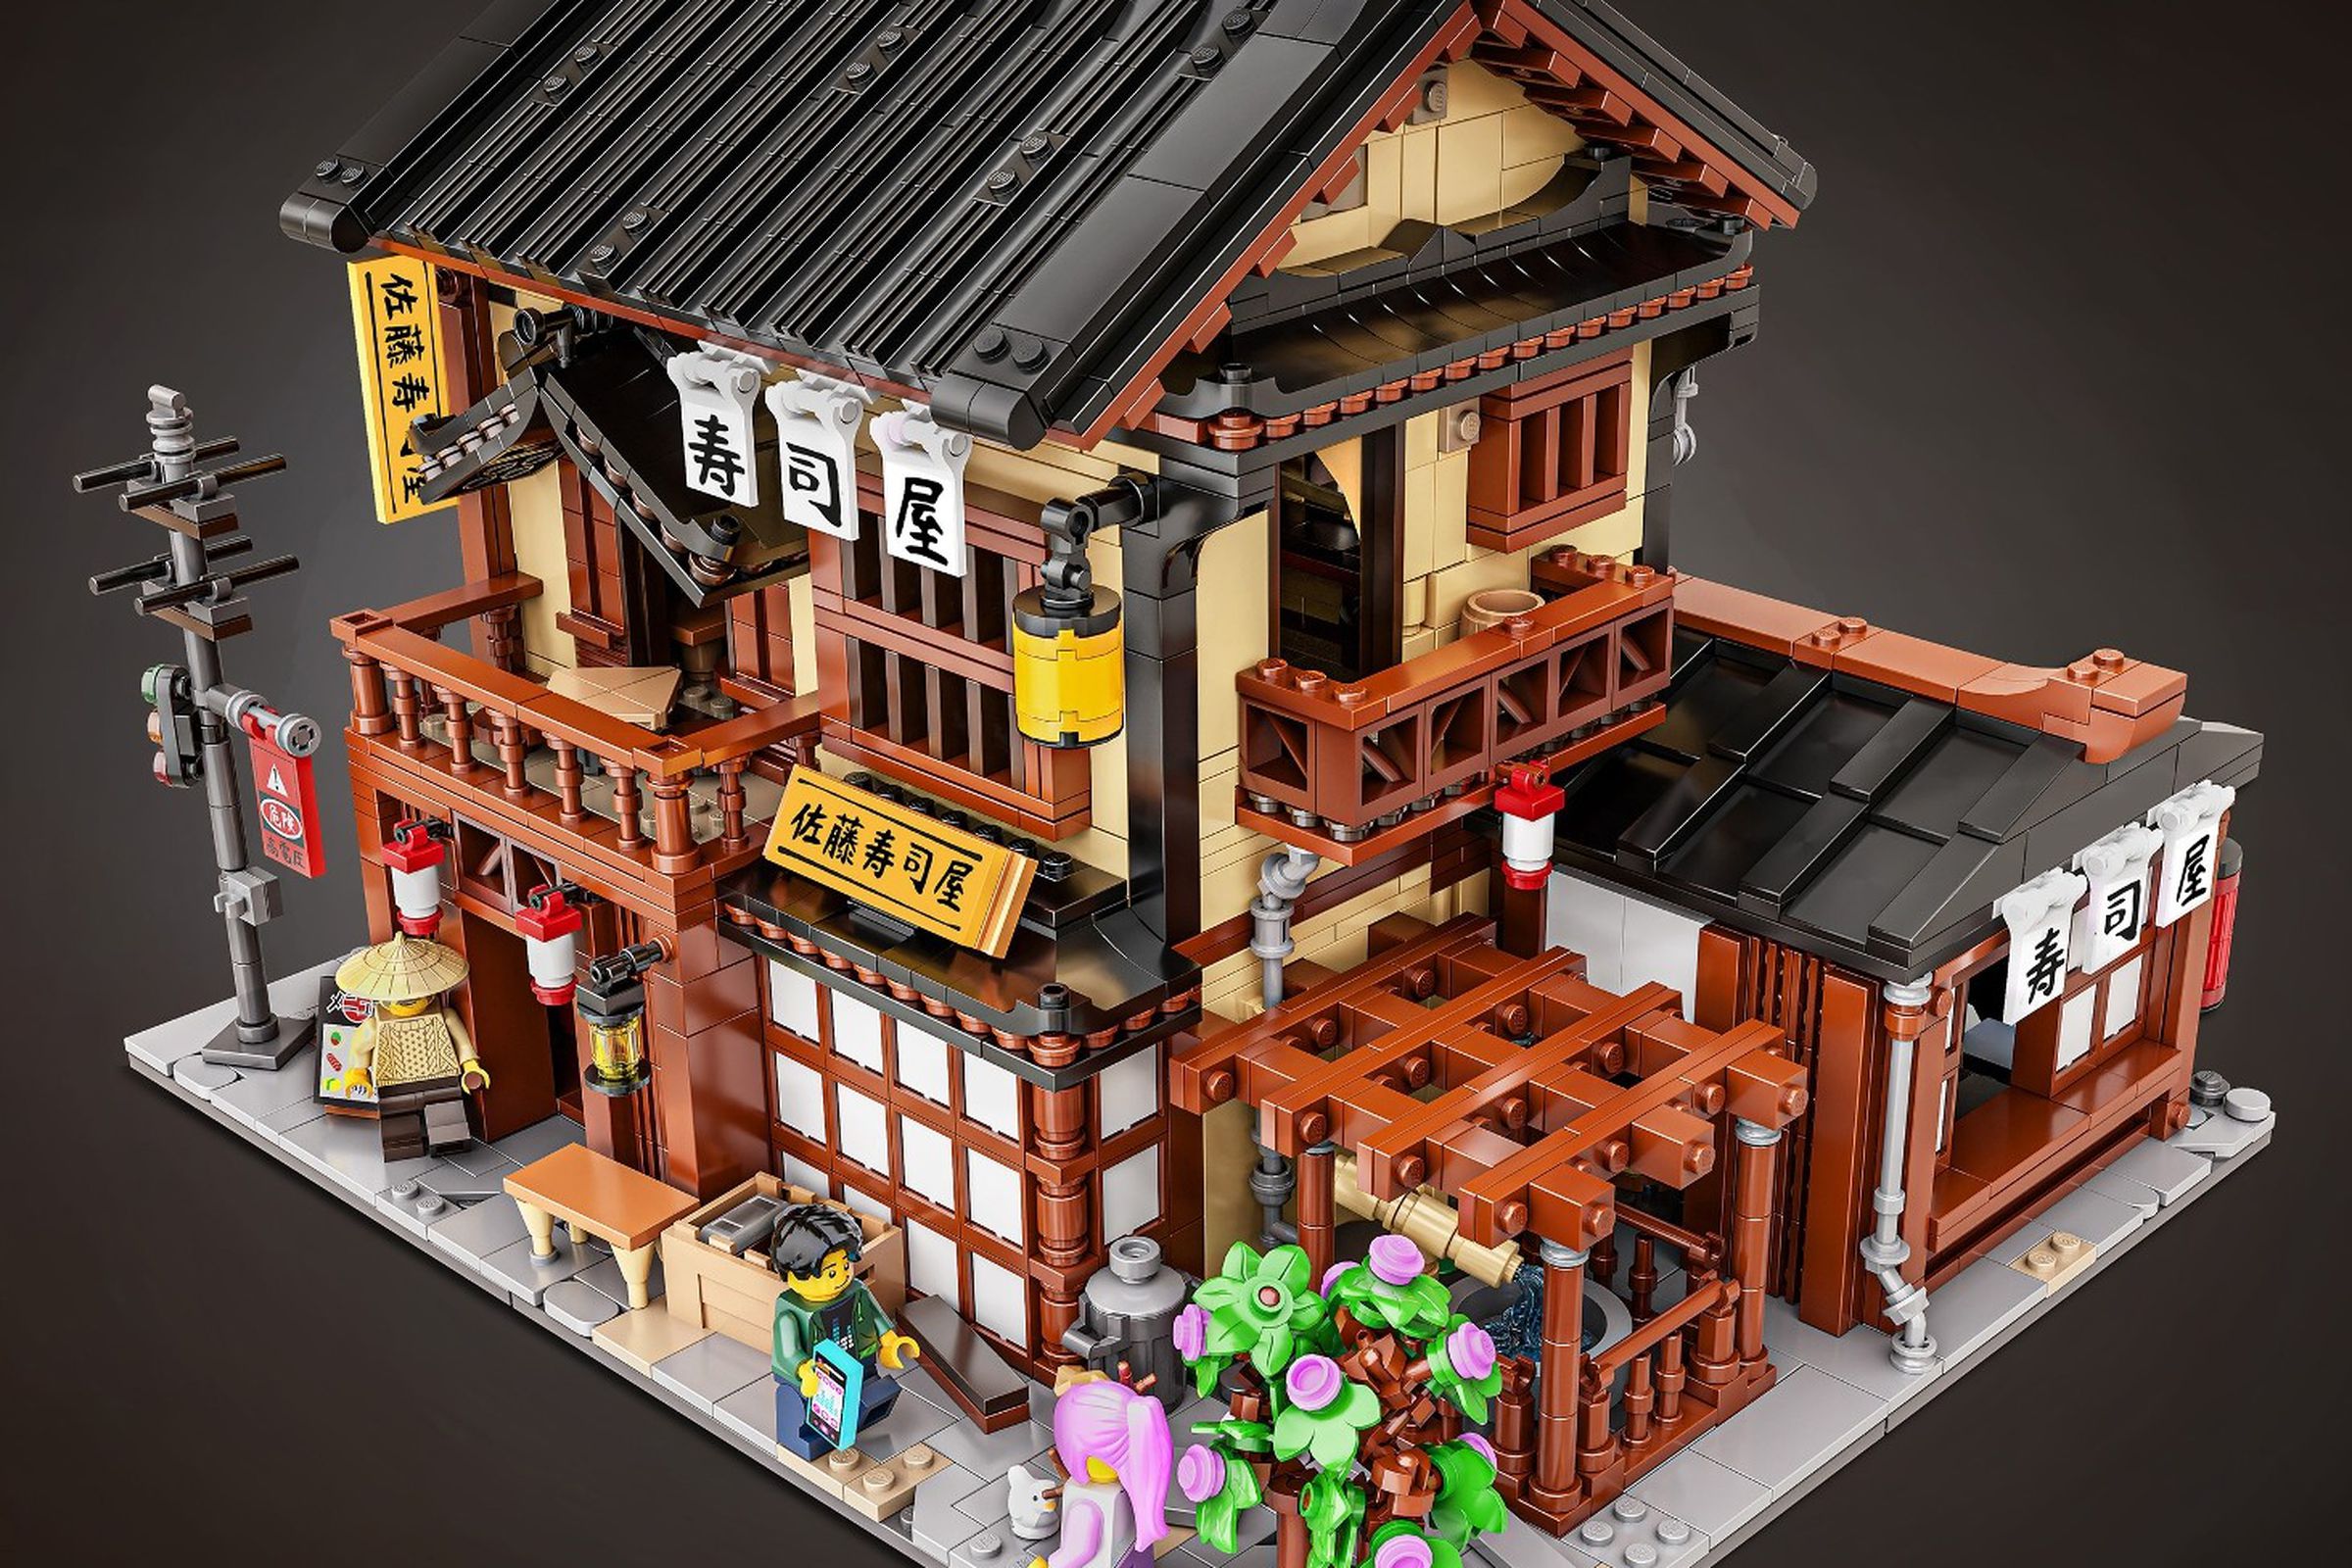 A traditional looking Japanese building made entirely out of Lego, with a fountain, flowers, two stories, entranceways and signs to the Sushi restaurant.